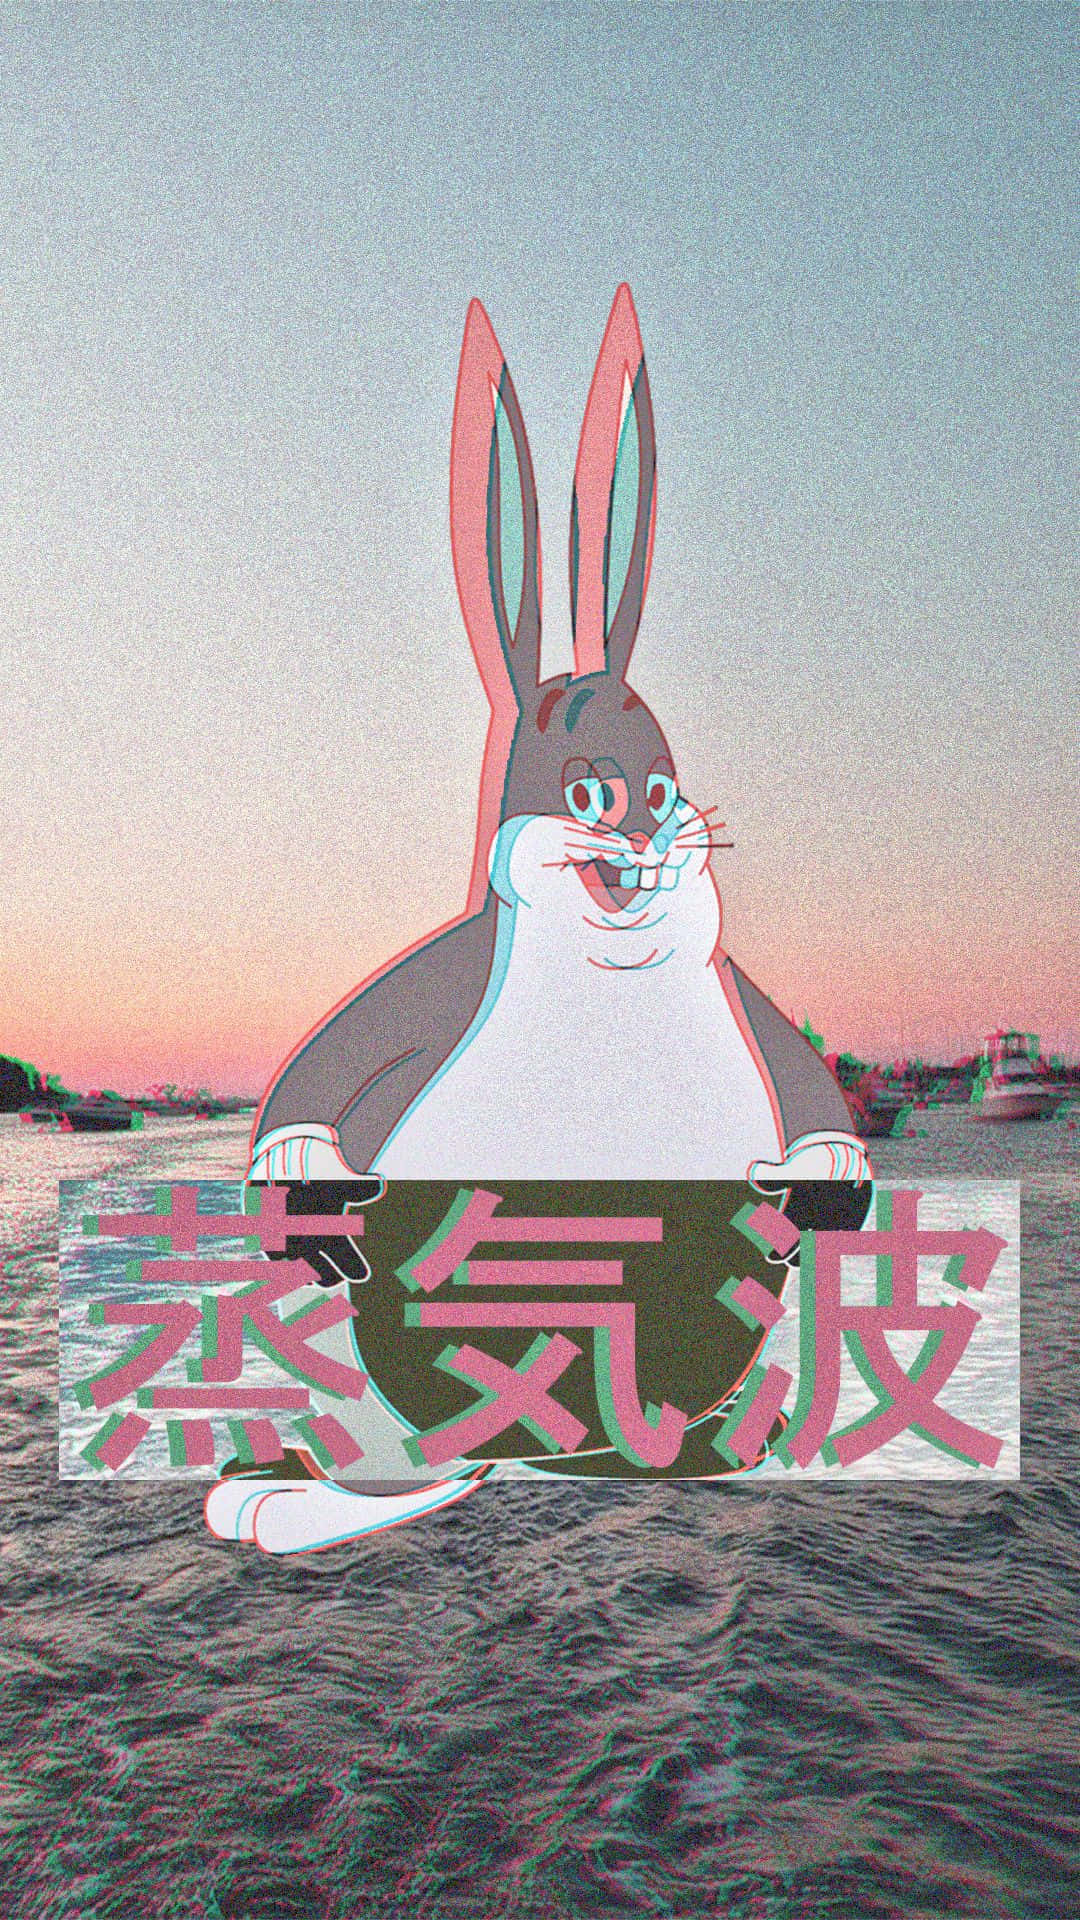 Big Chungus - The Classic Video Game Character Background